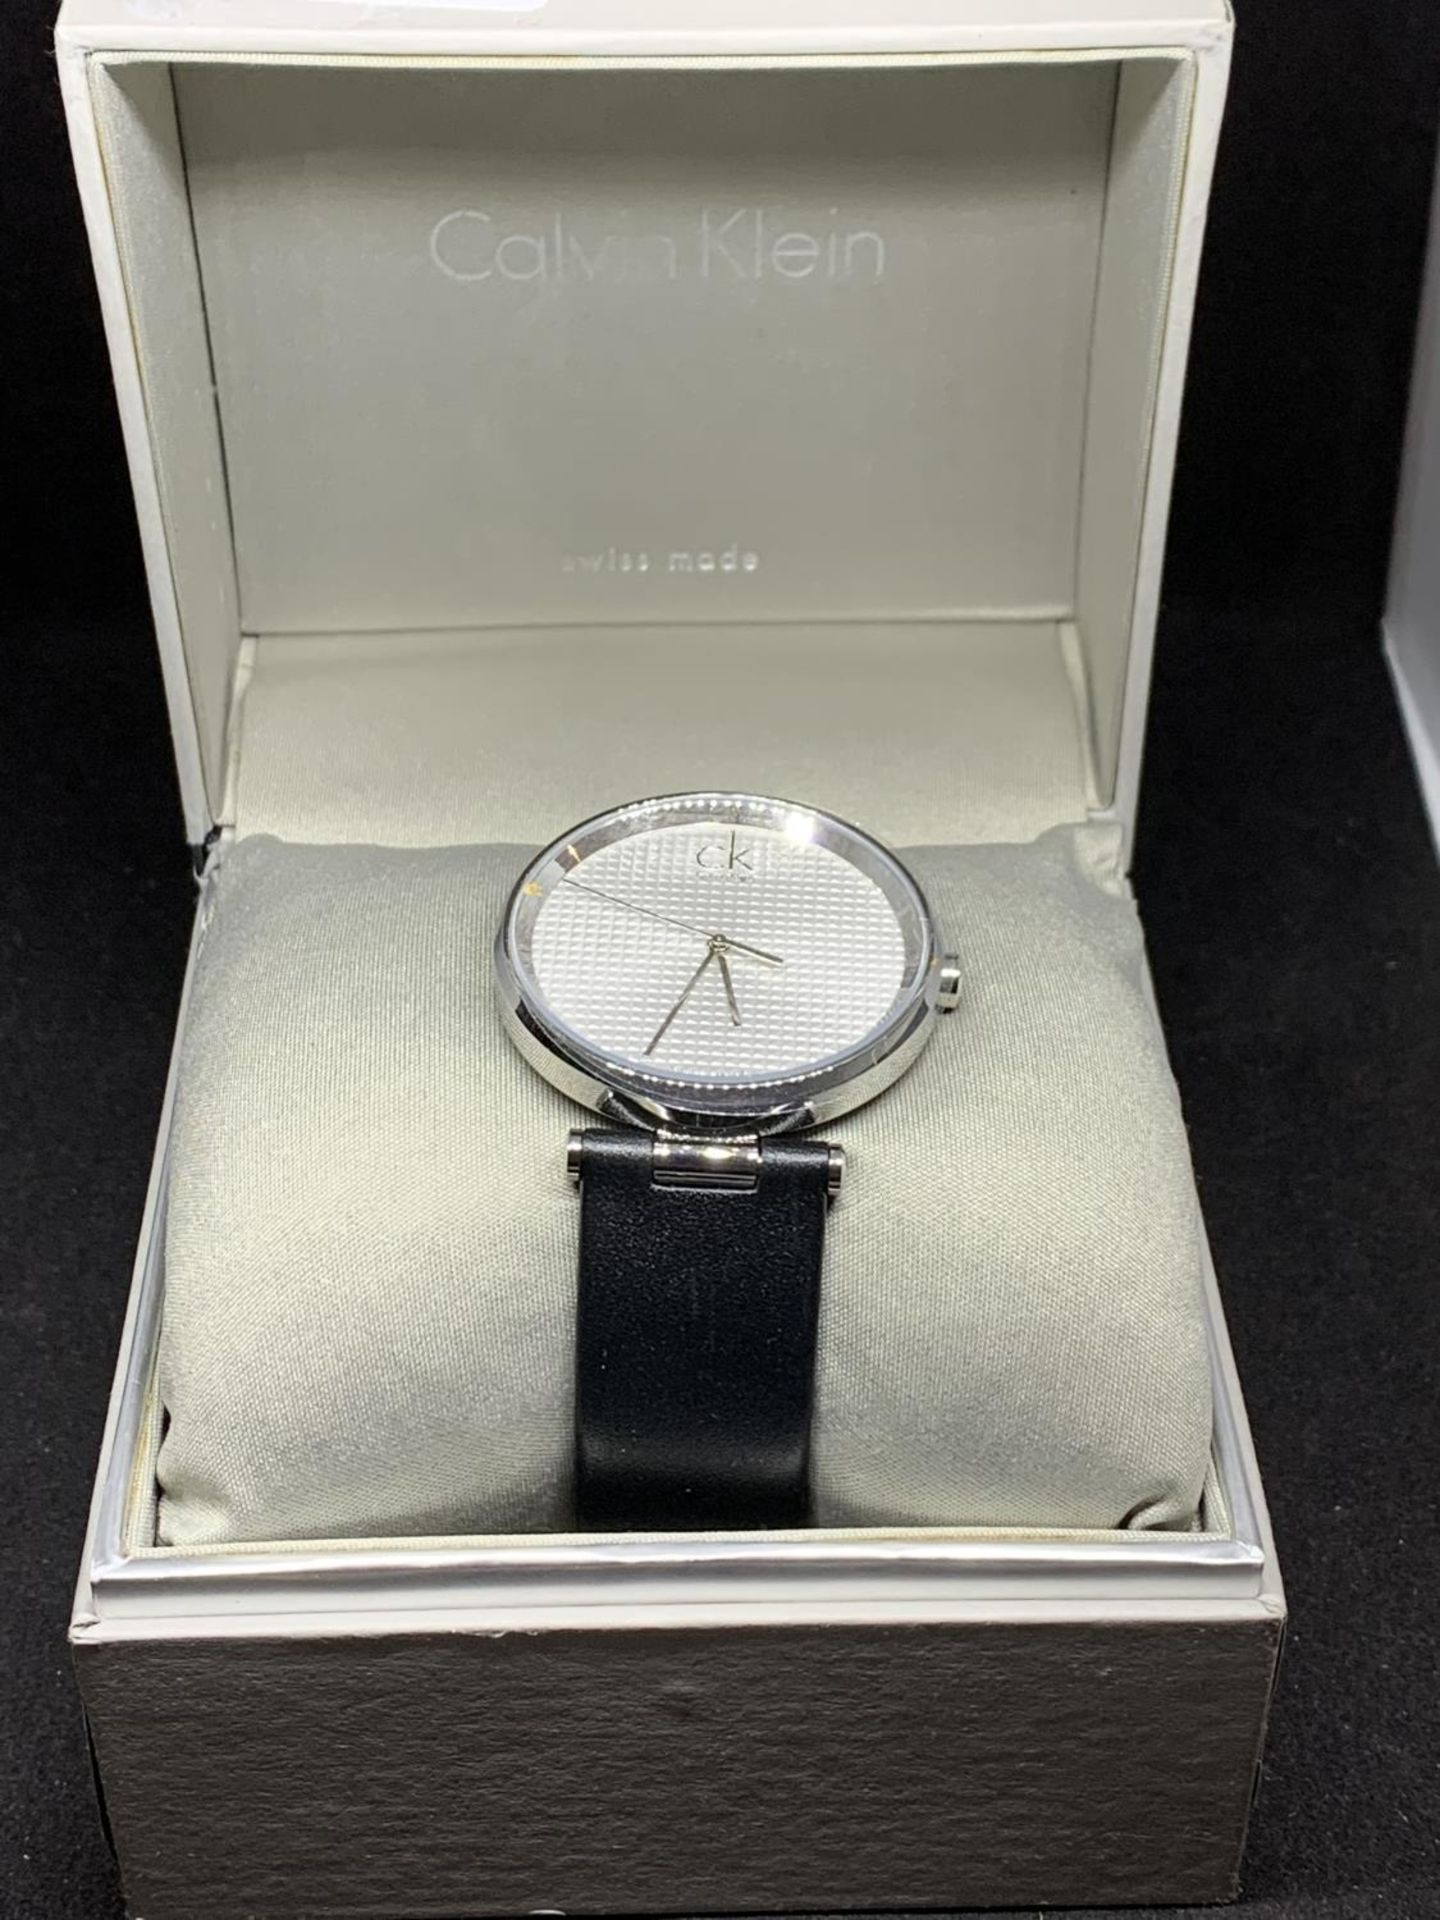 AN AS NEW AND BOXED CALVIN KLEIN CALENDER WRIST WATCH IN WORKING ORDER